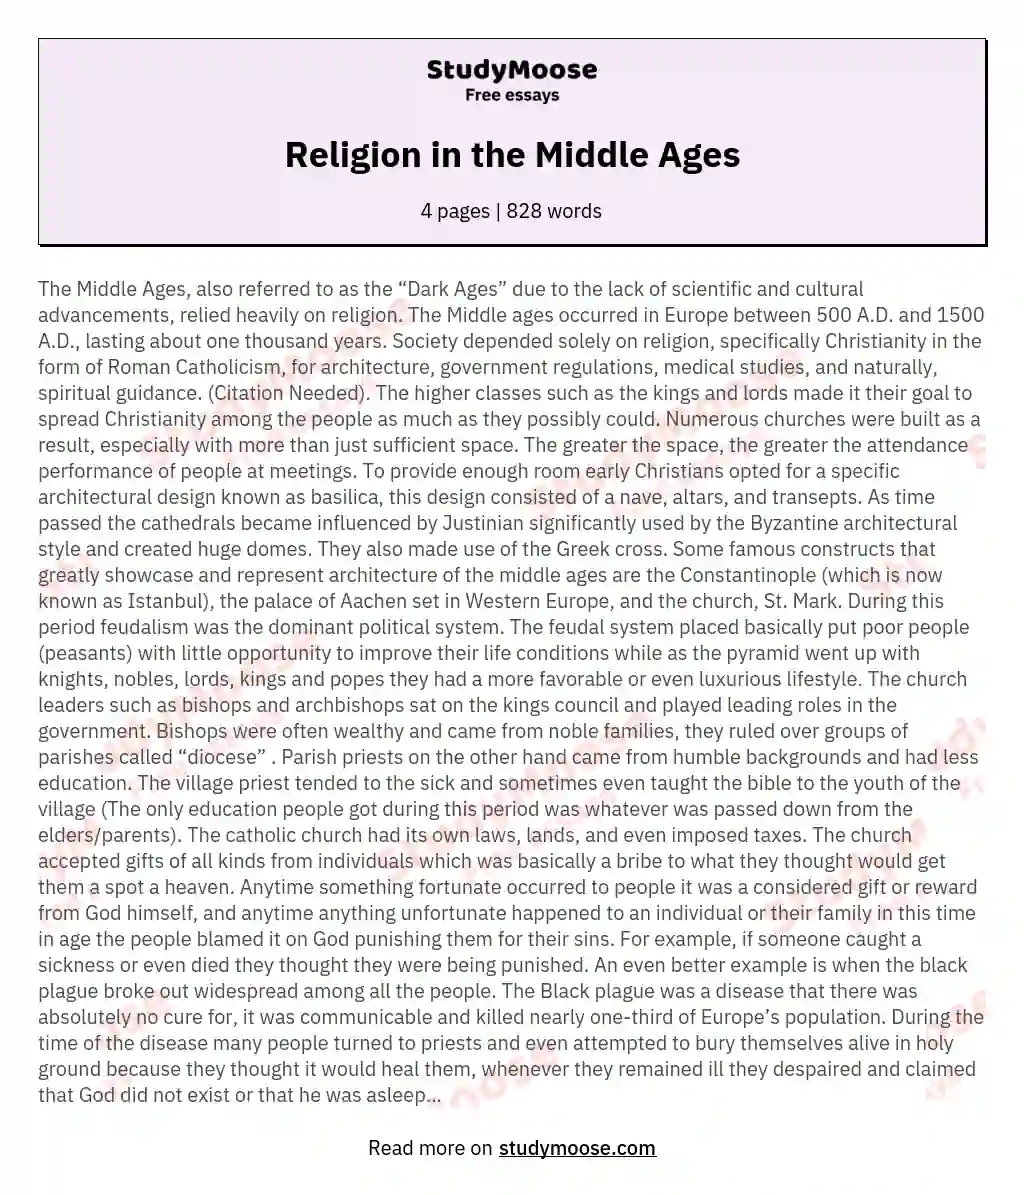 Religion in the Middle Ages essay